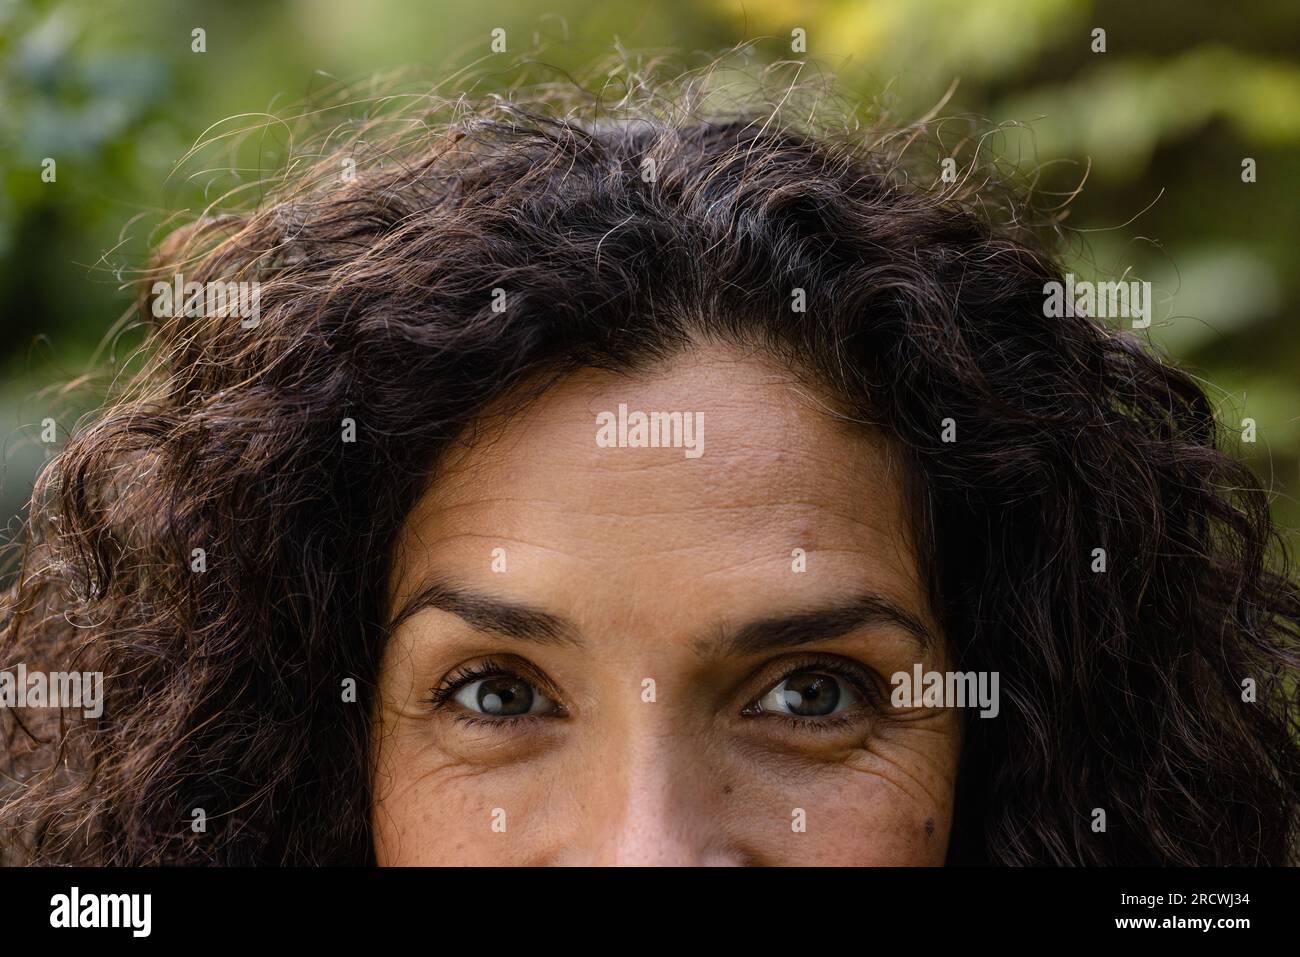 Portrait of happy biracial woman with dark curly hair smiling in garden Stock Photo